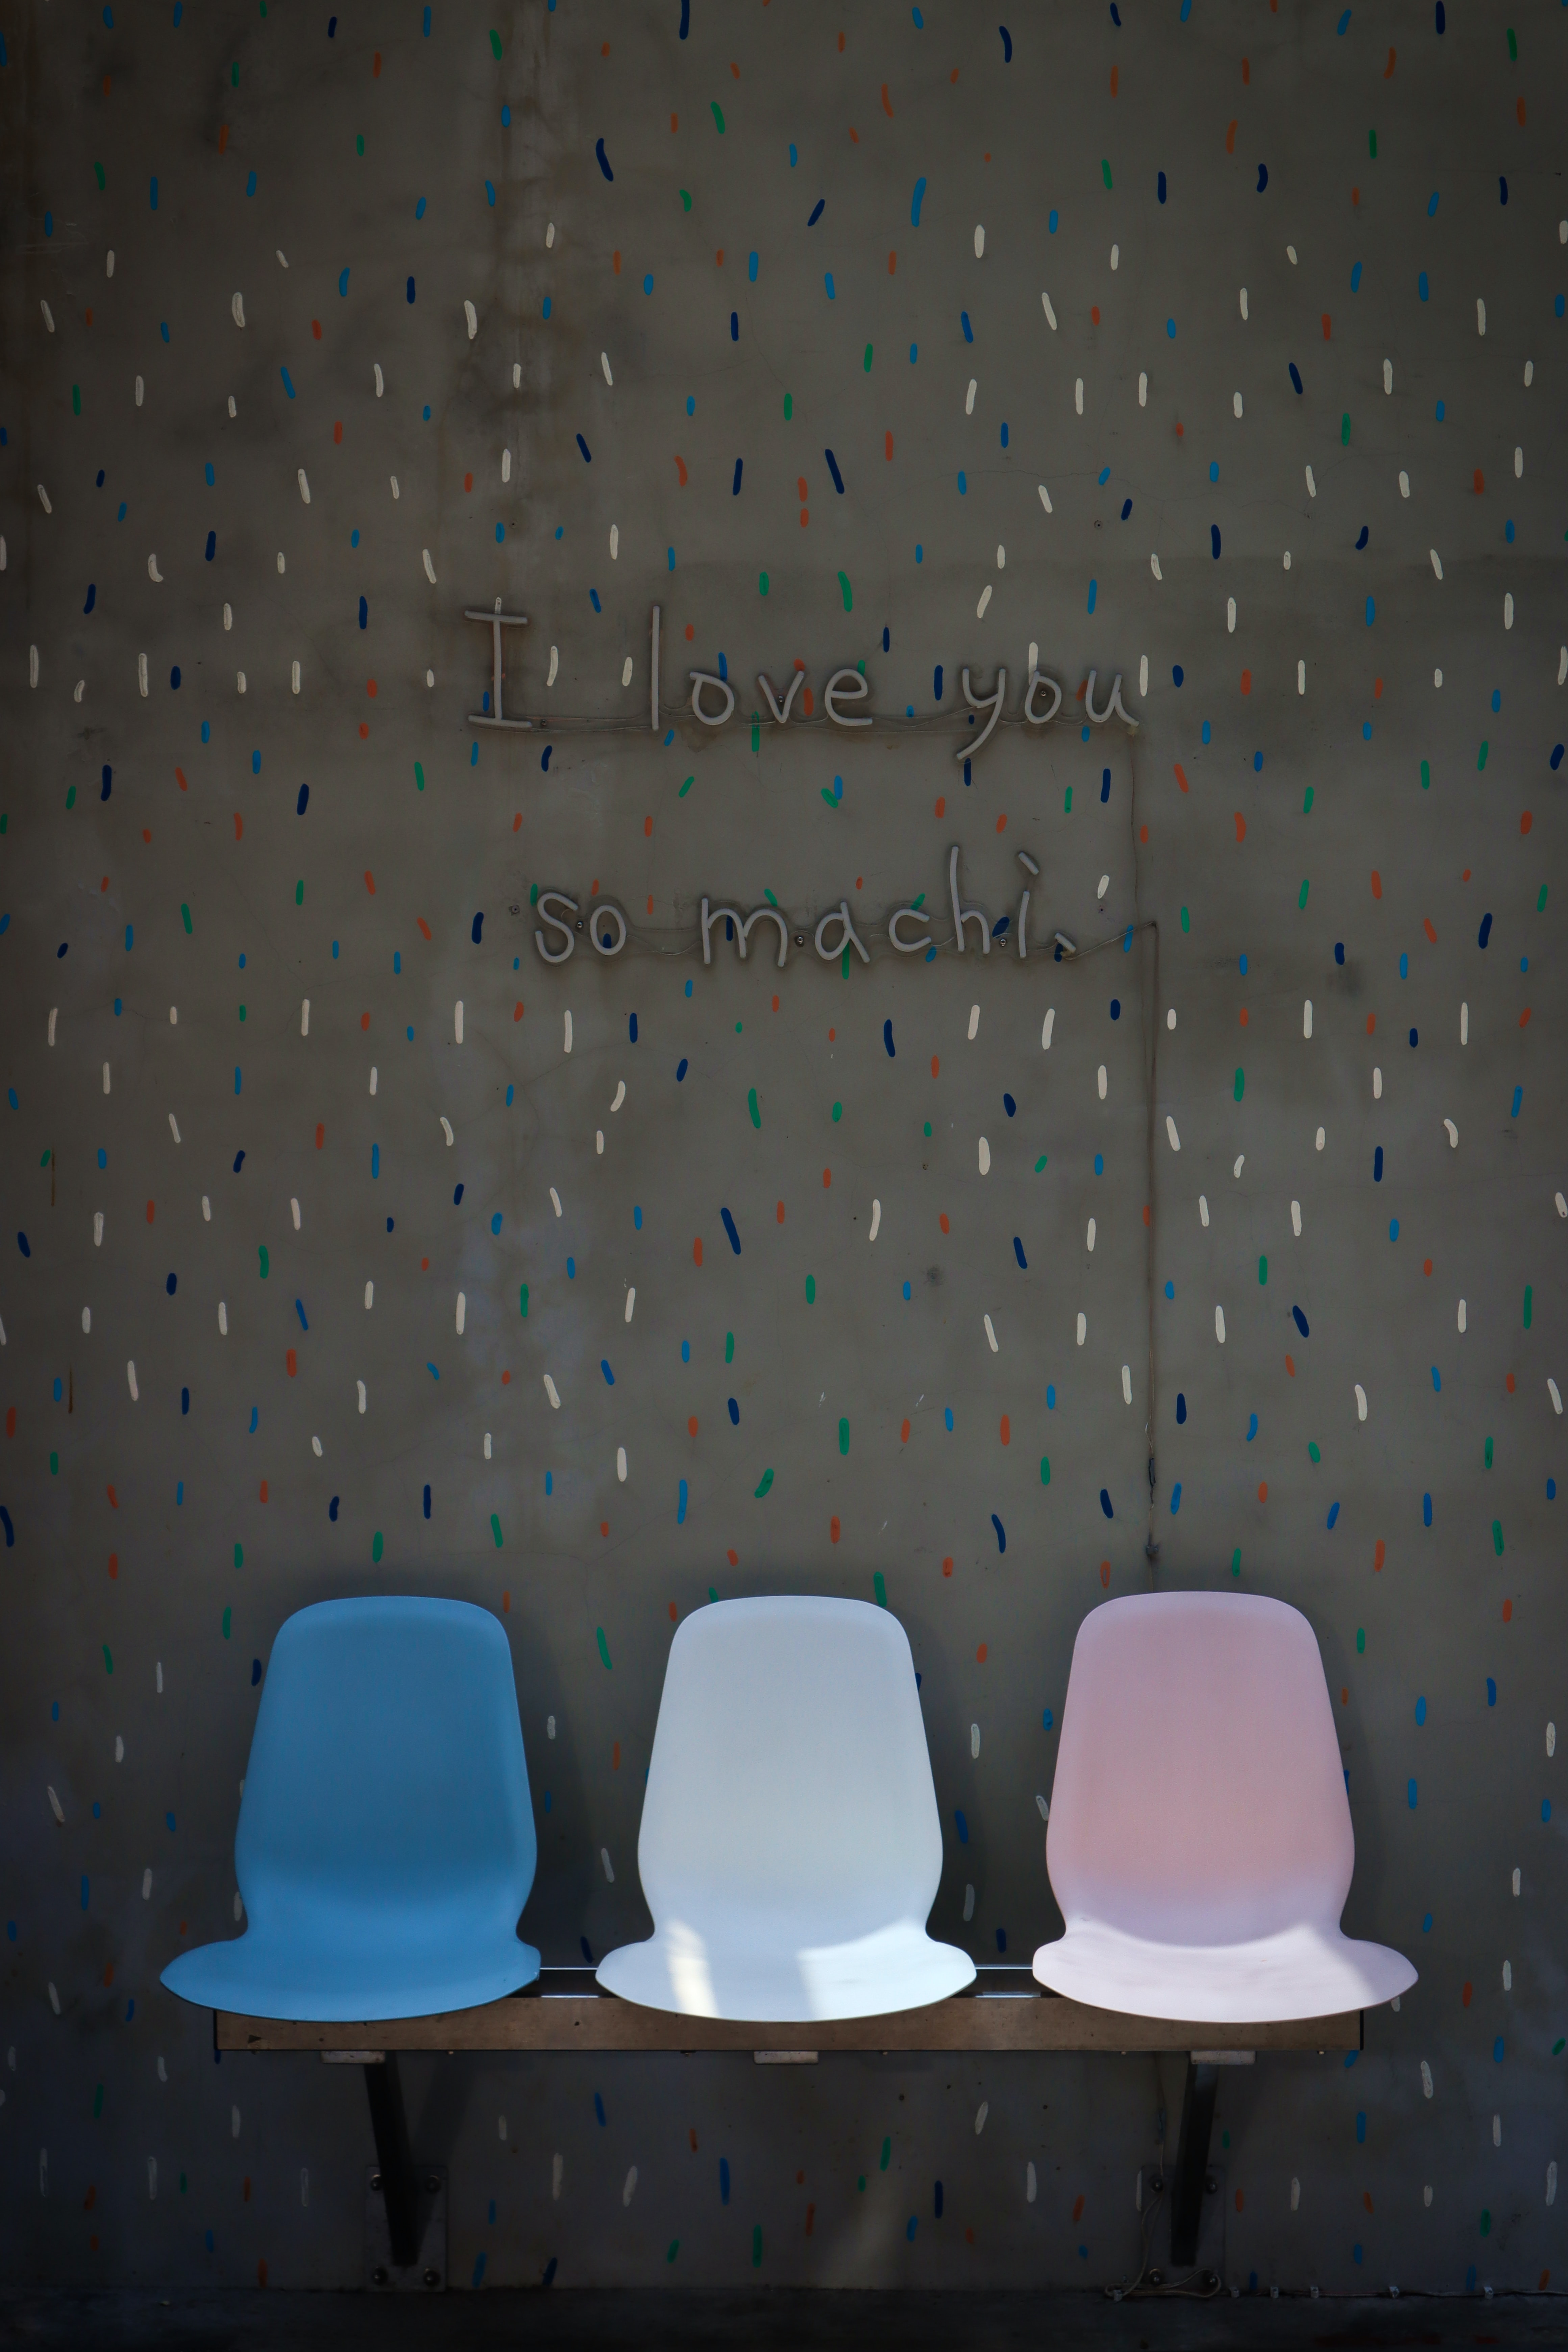 love, seat, words, wall, phrase, seats